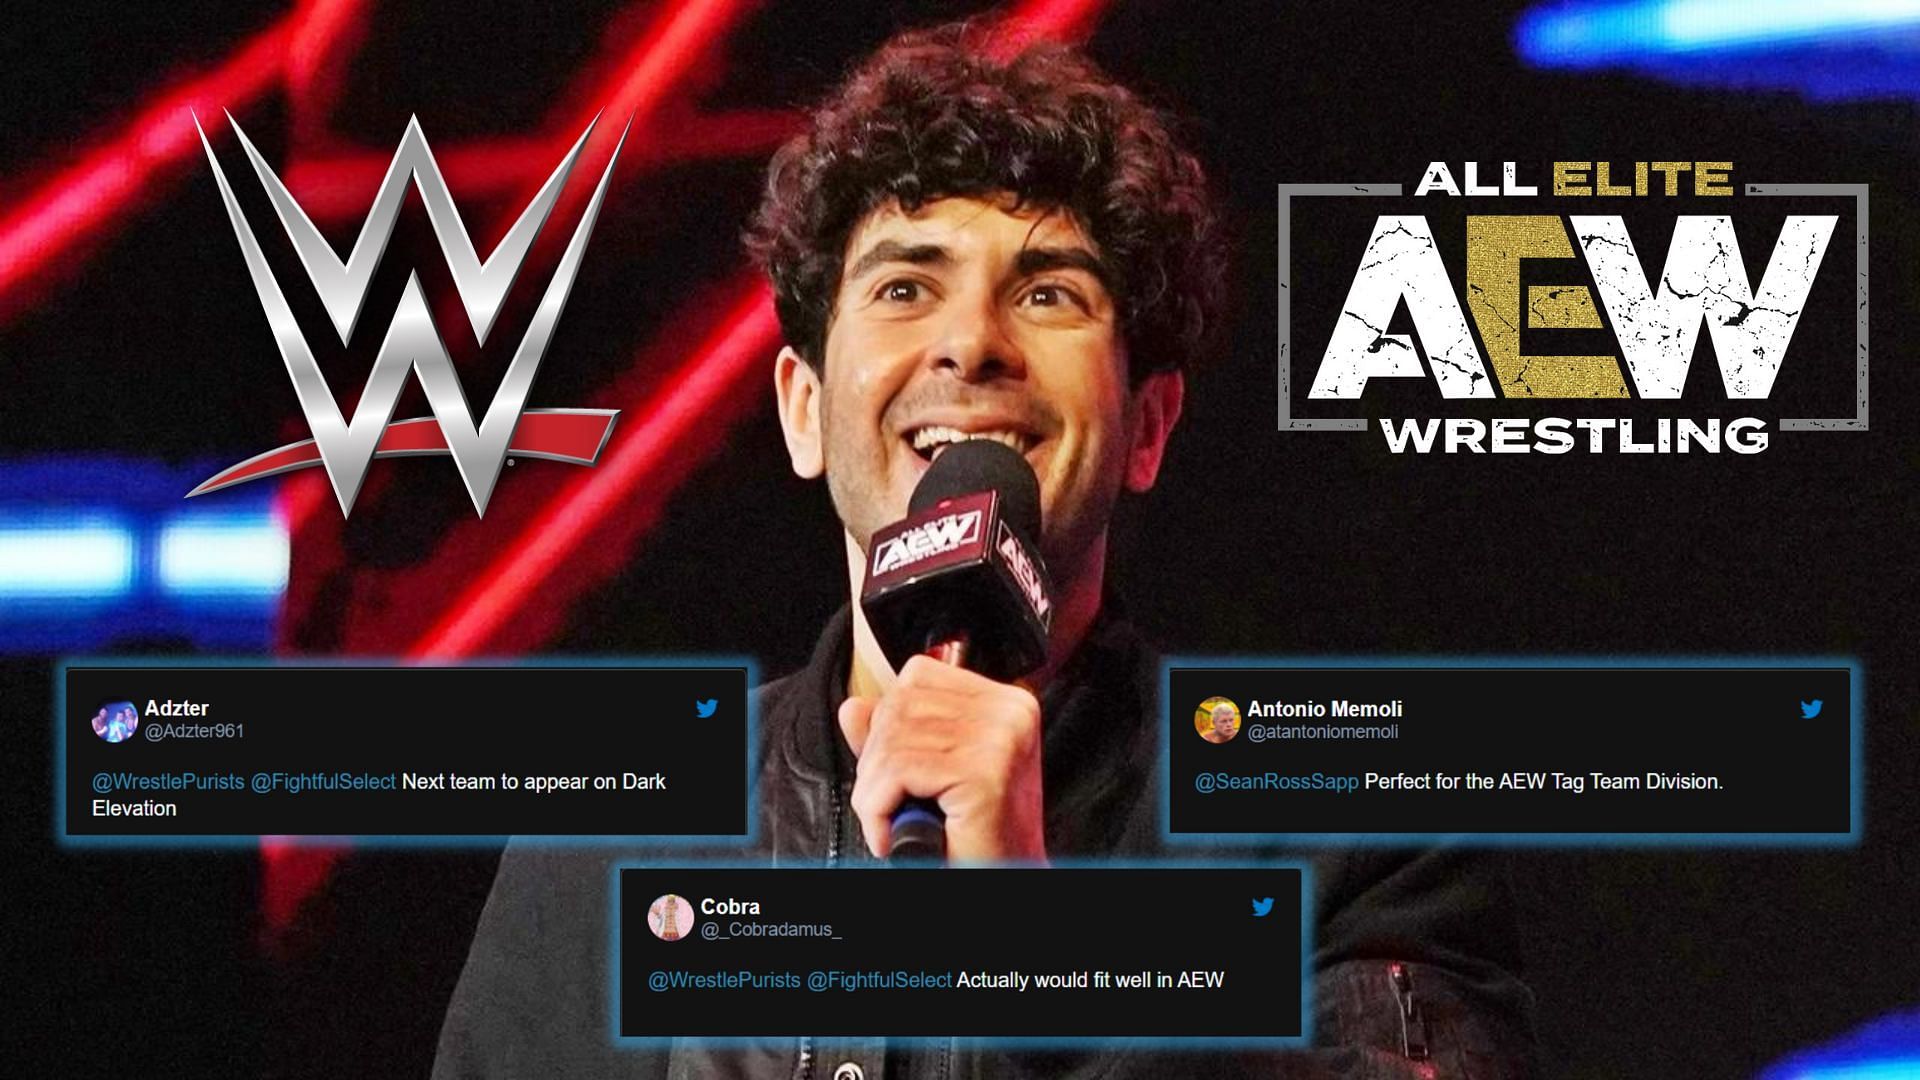 Will Tony Khan sign another tag team to AEW?